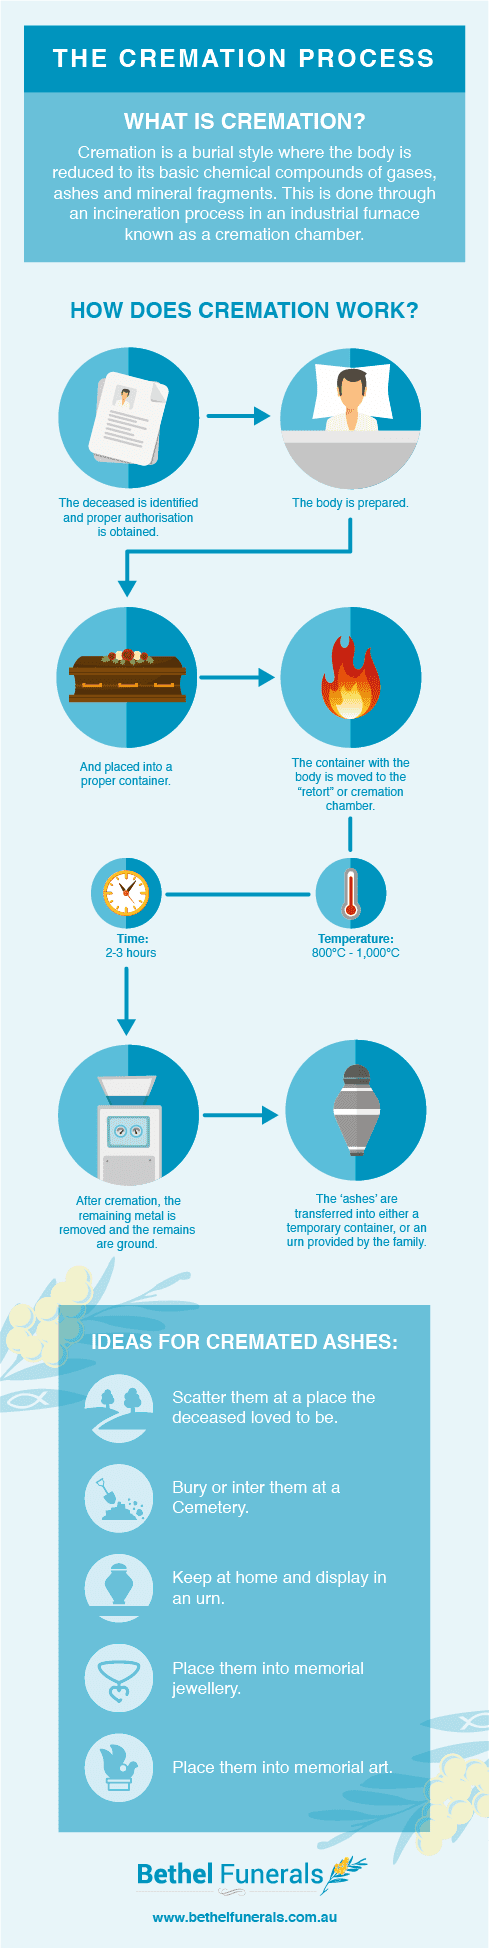 cremation process infographic